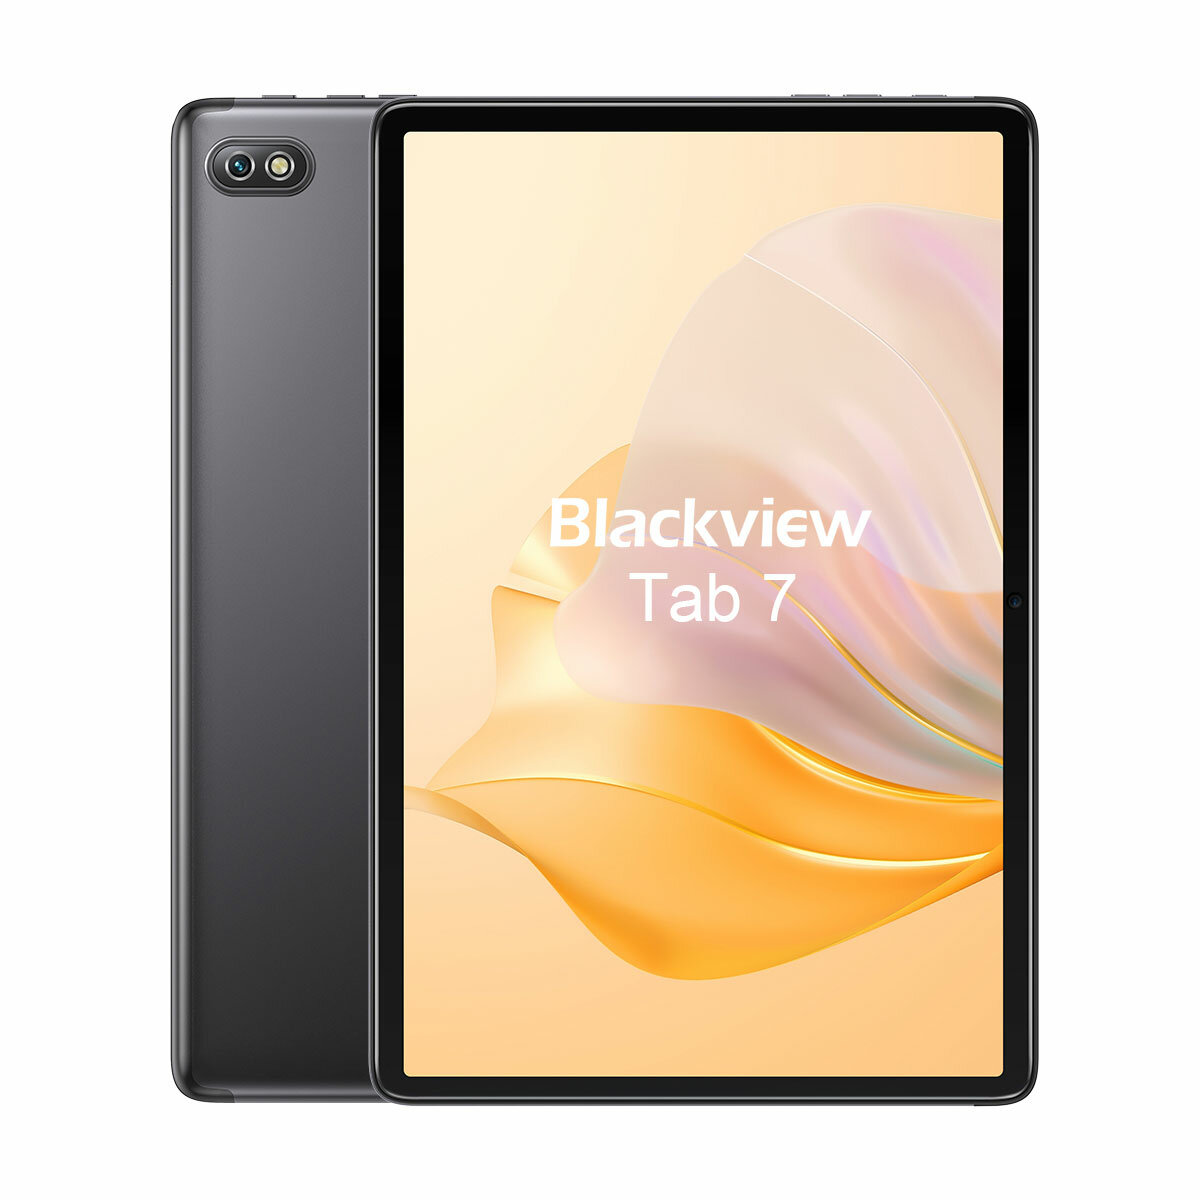 Blackview TAB 7 UNISOC T310 Quad Core 3GB RAM 32GB ROM 10.1 Inch 4G LTE Android 11 Tablet